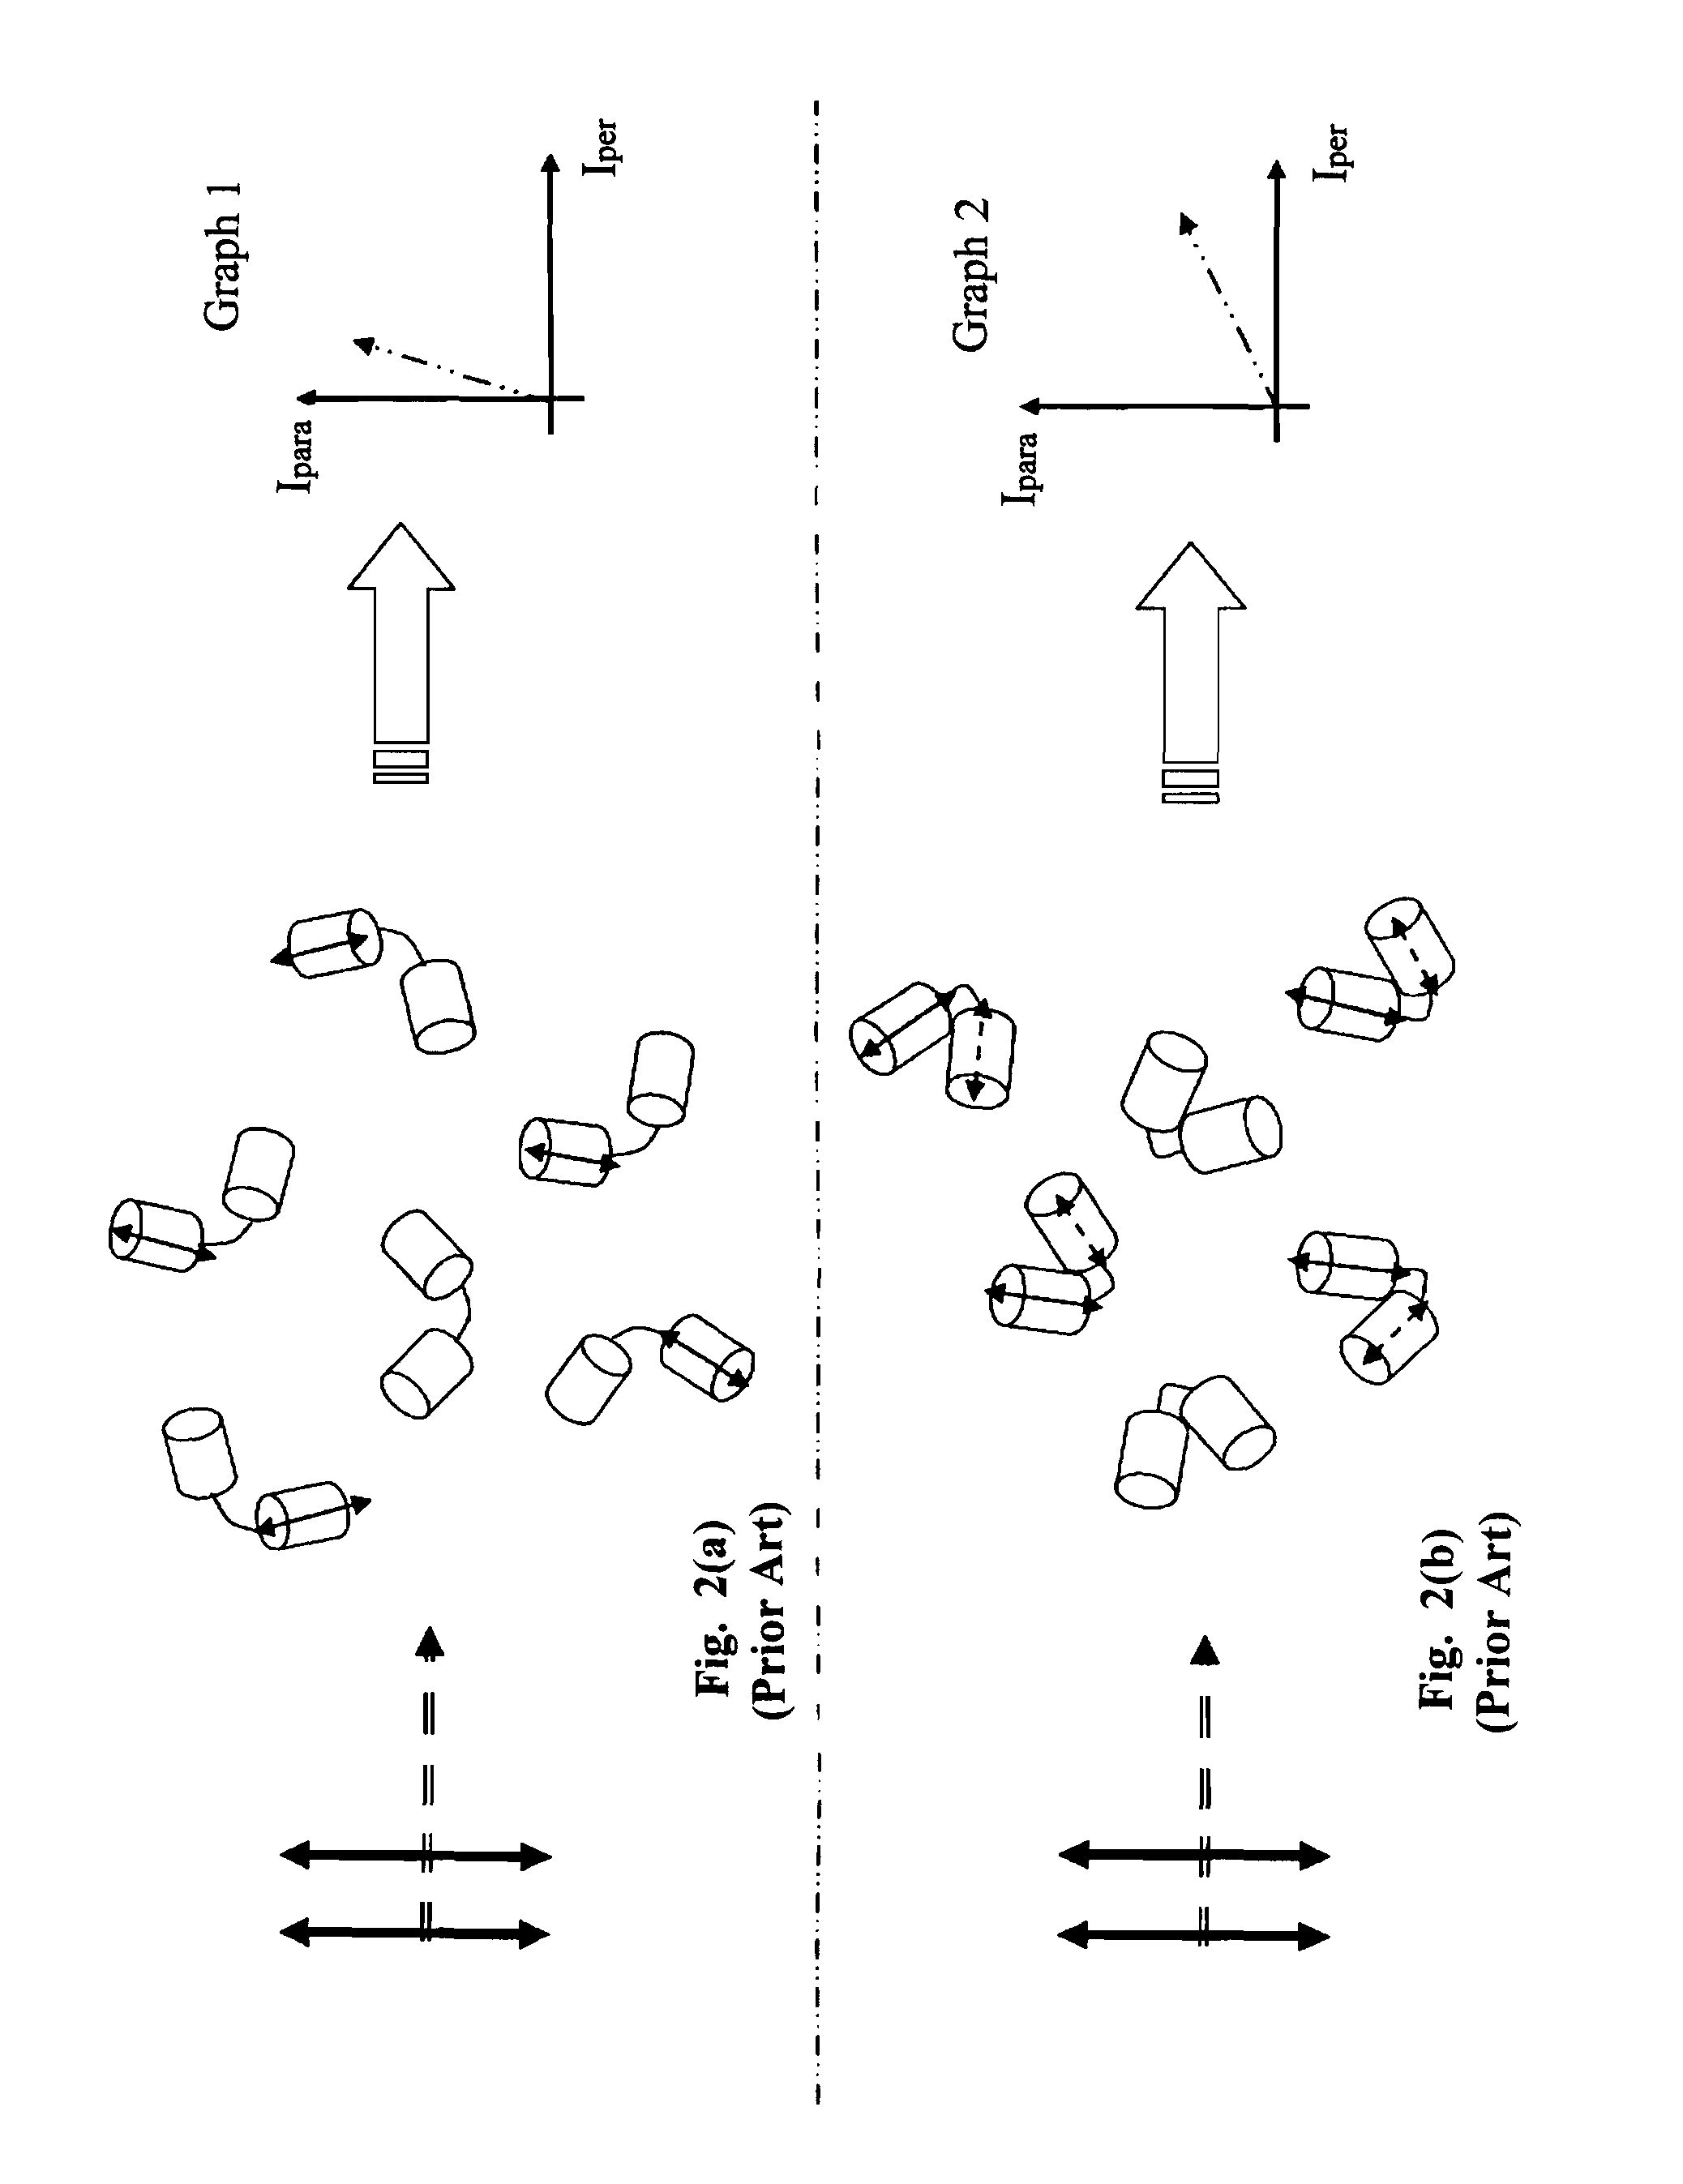 Laser scanning microscope that includes a scanning device and at least one controllable optical element that controls the polarization plane of light incident onto a sample, and method of use